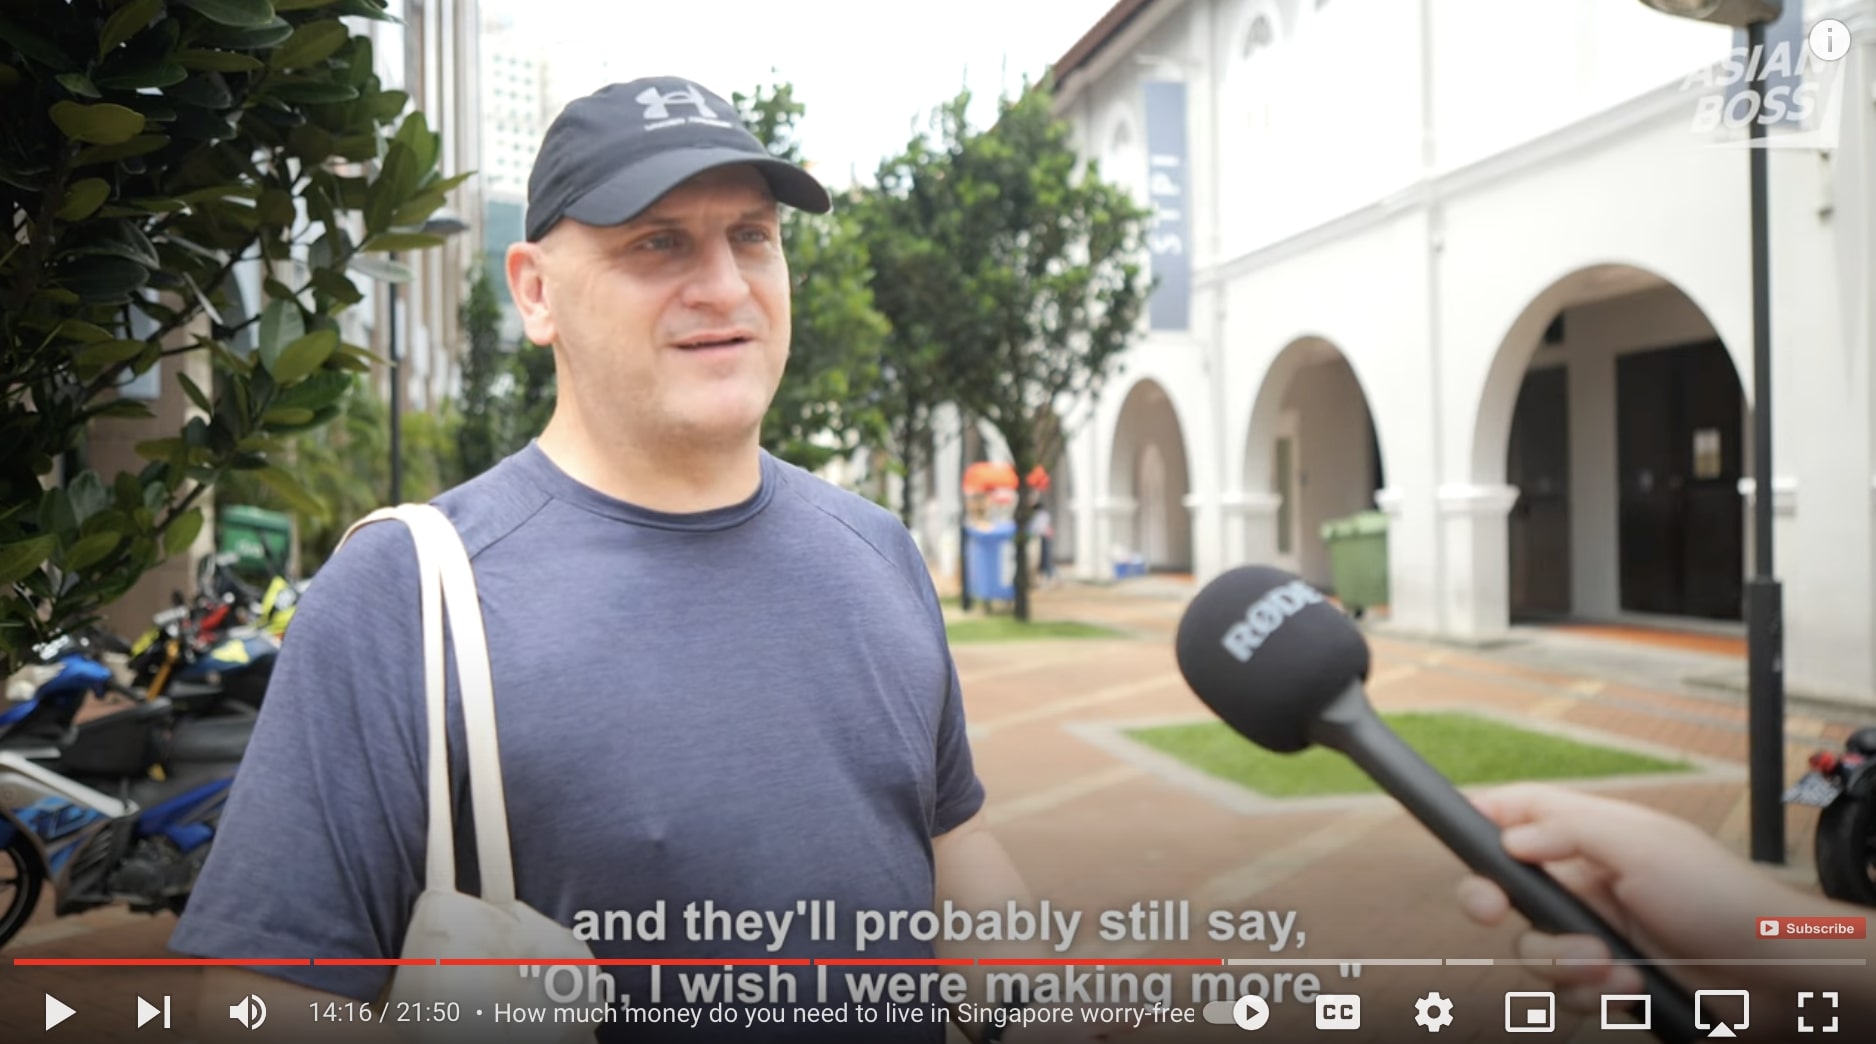 Expat getting interviewed in Singapore.